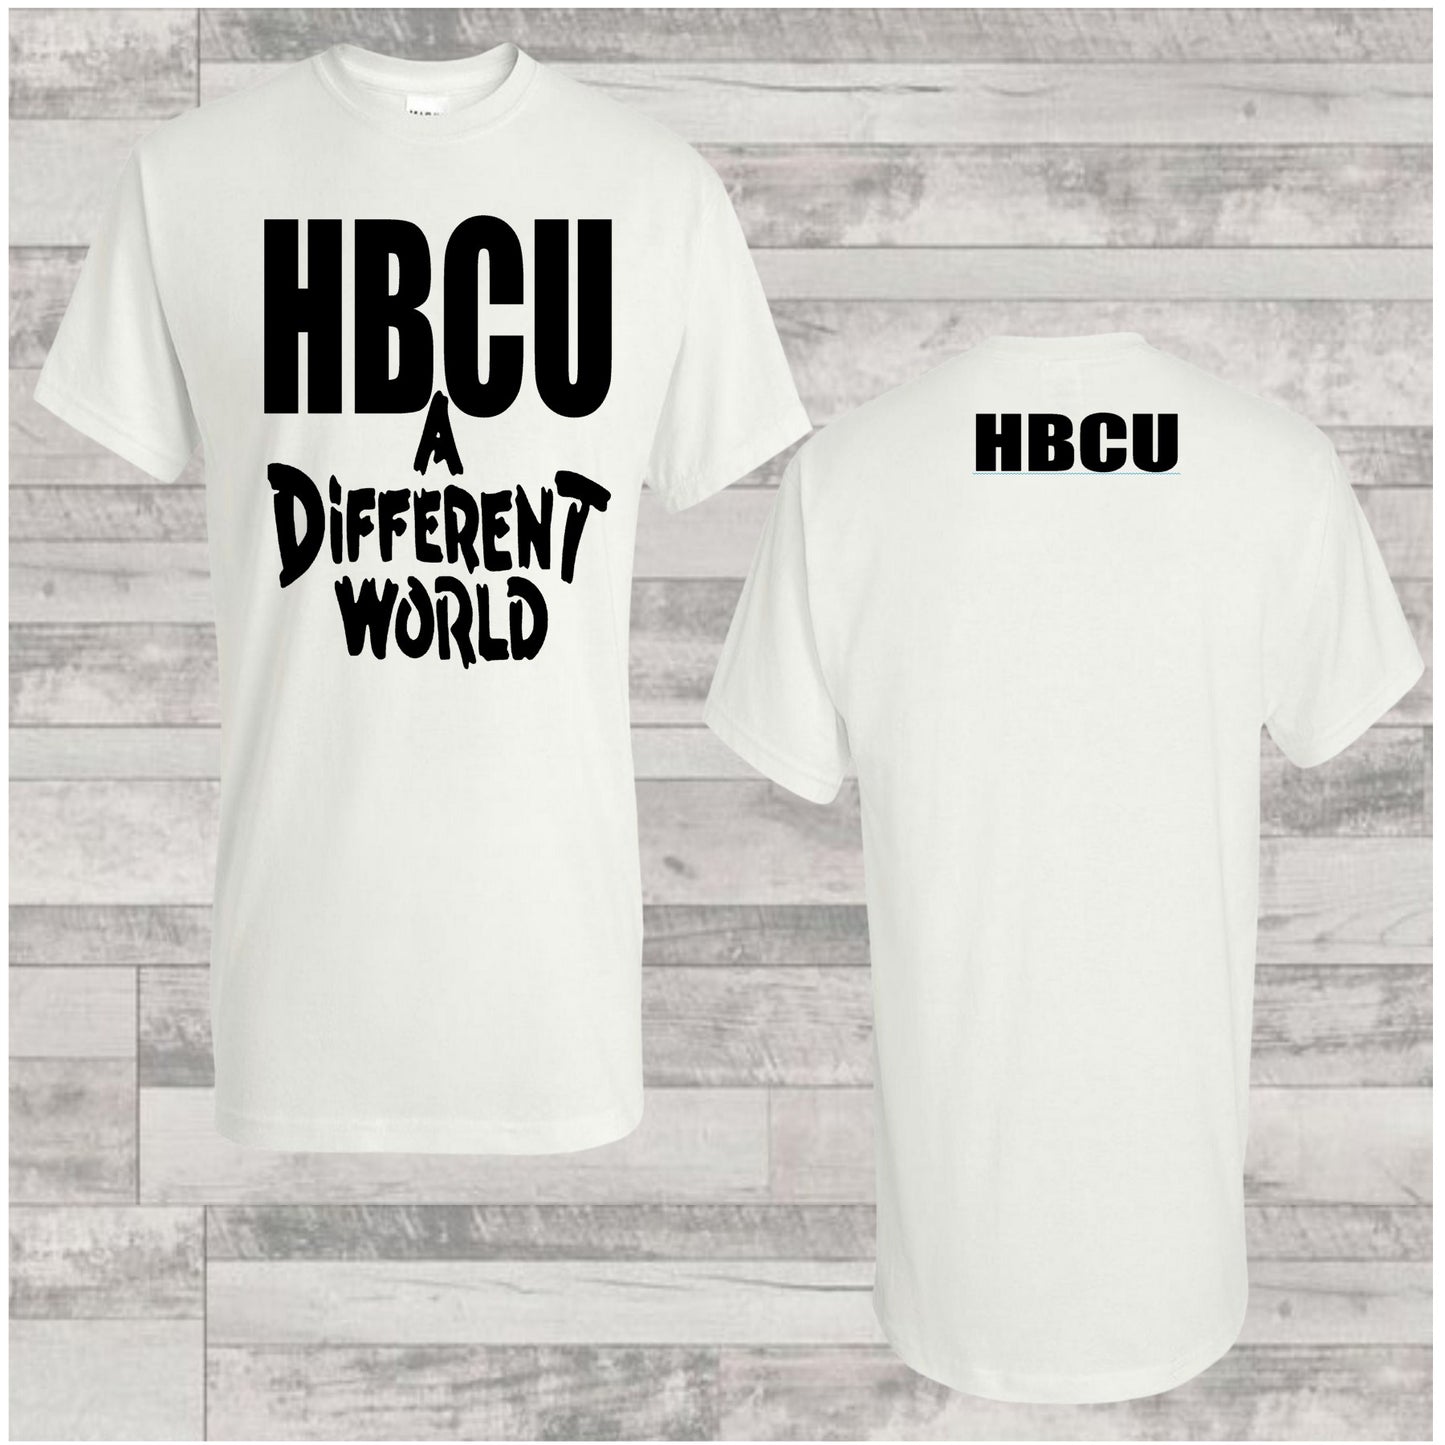 HBCU A DIFFERENT WORLD SHIRT    Message us for additional colors or customizations. Contact us form at the bottom of the website